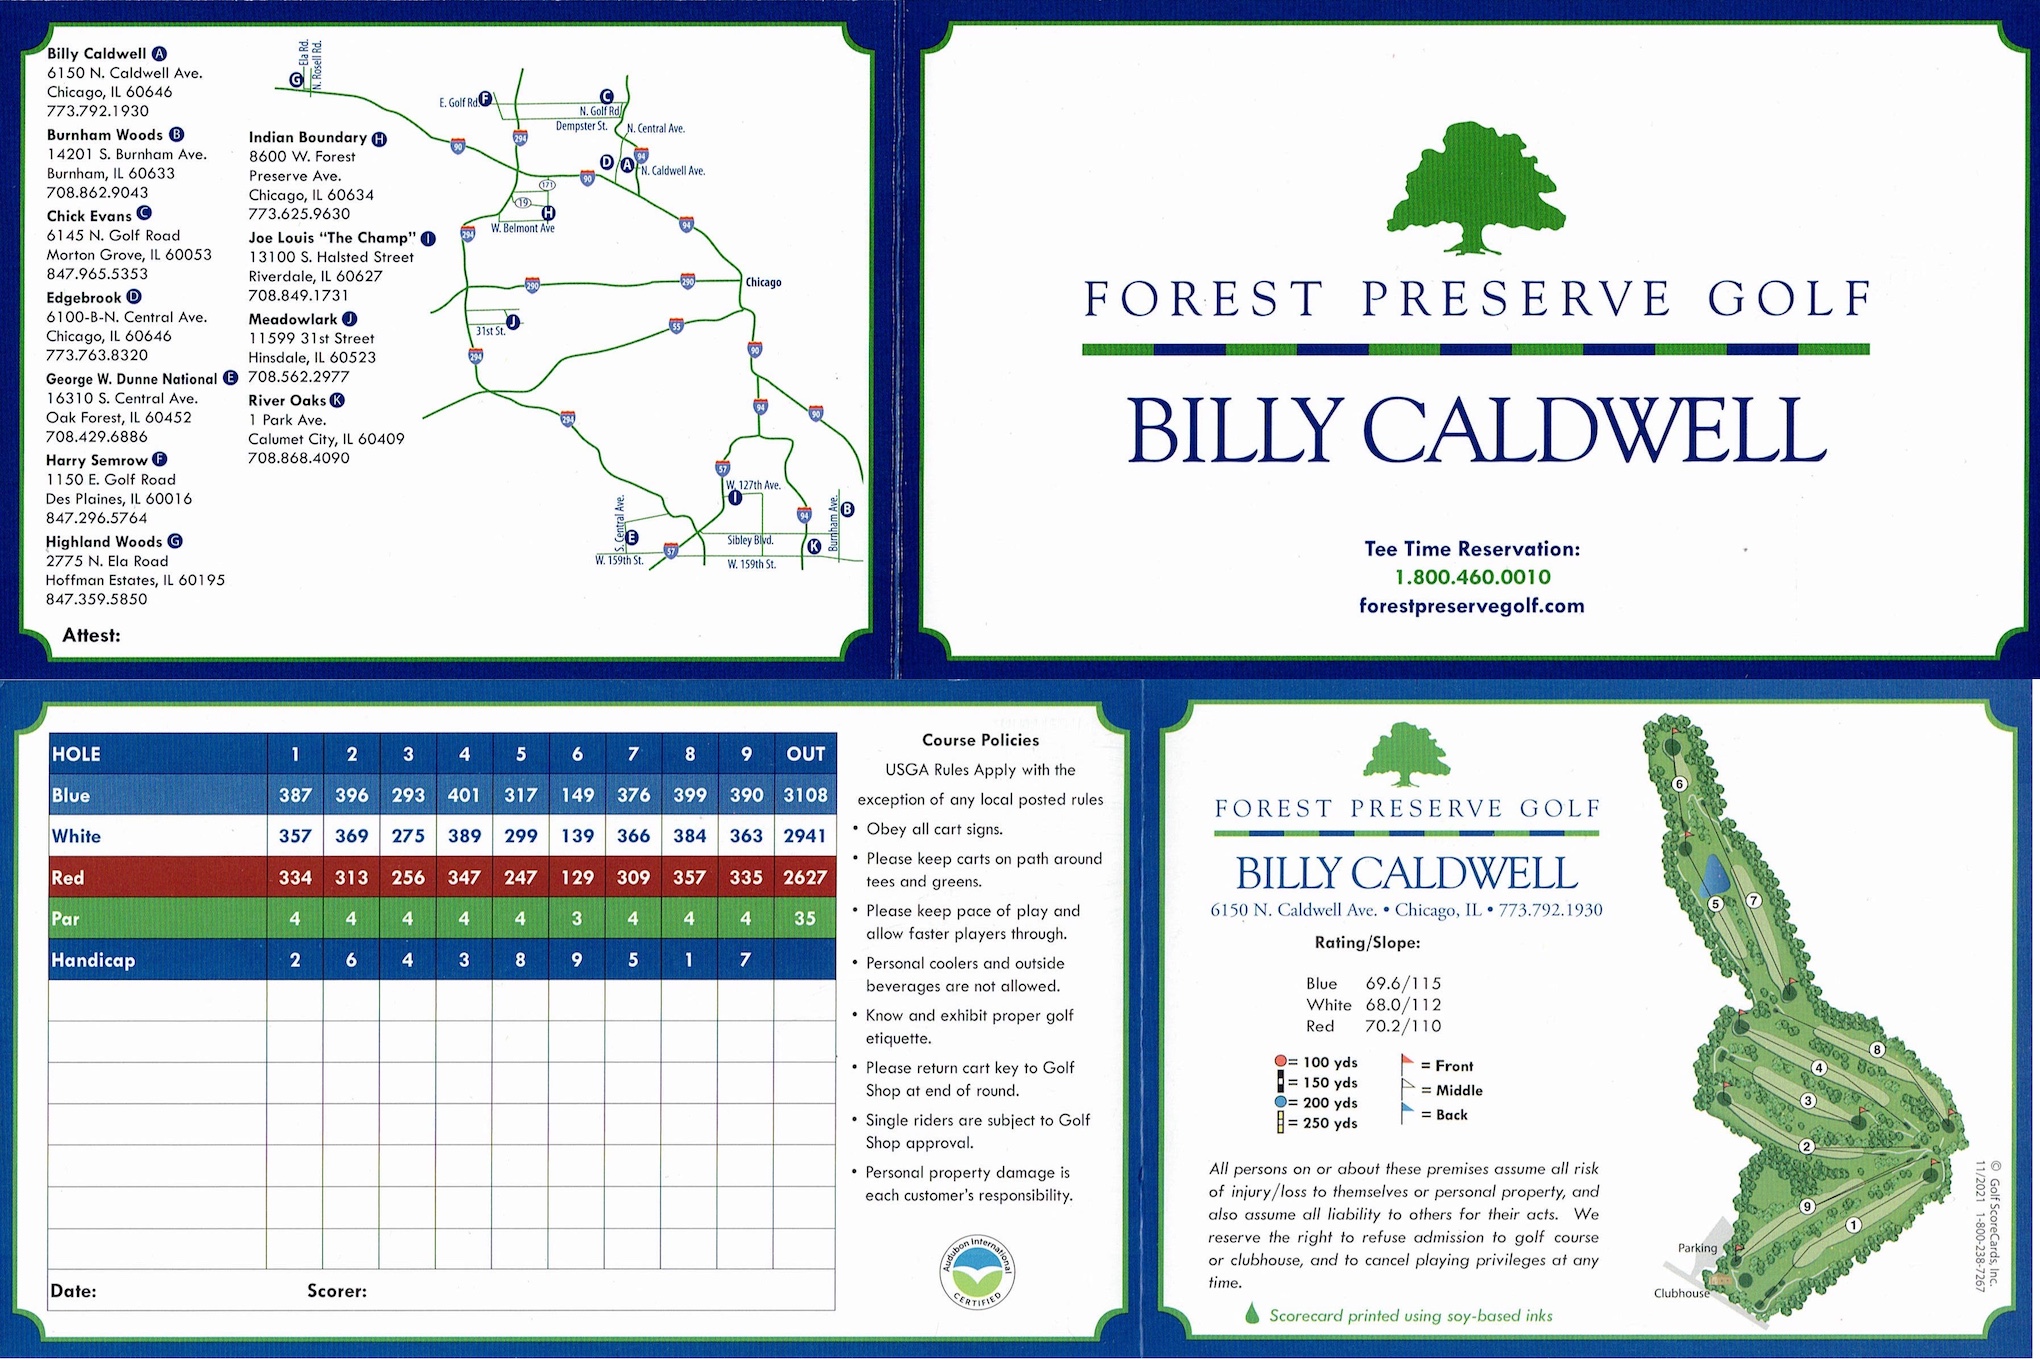 Scan of the scorecard from Billy Caldwell Golf Course in Chicago, Illinois. Scan of the front and back of the Billy Caldwell scorecard.